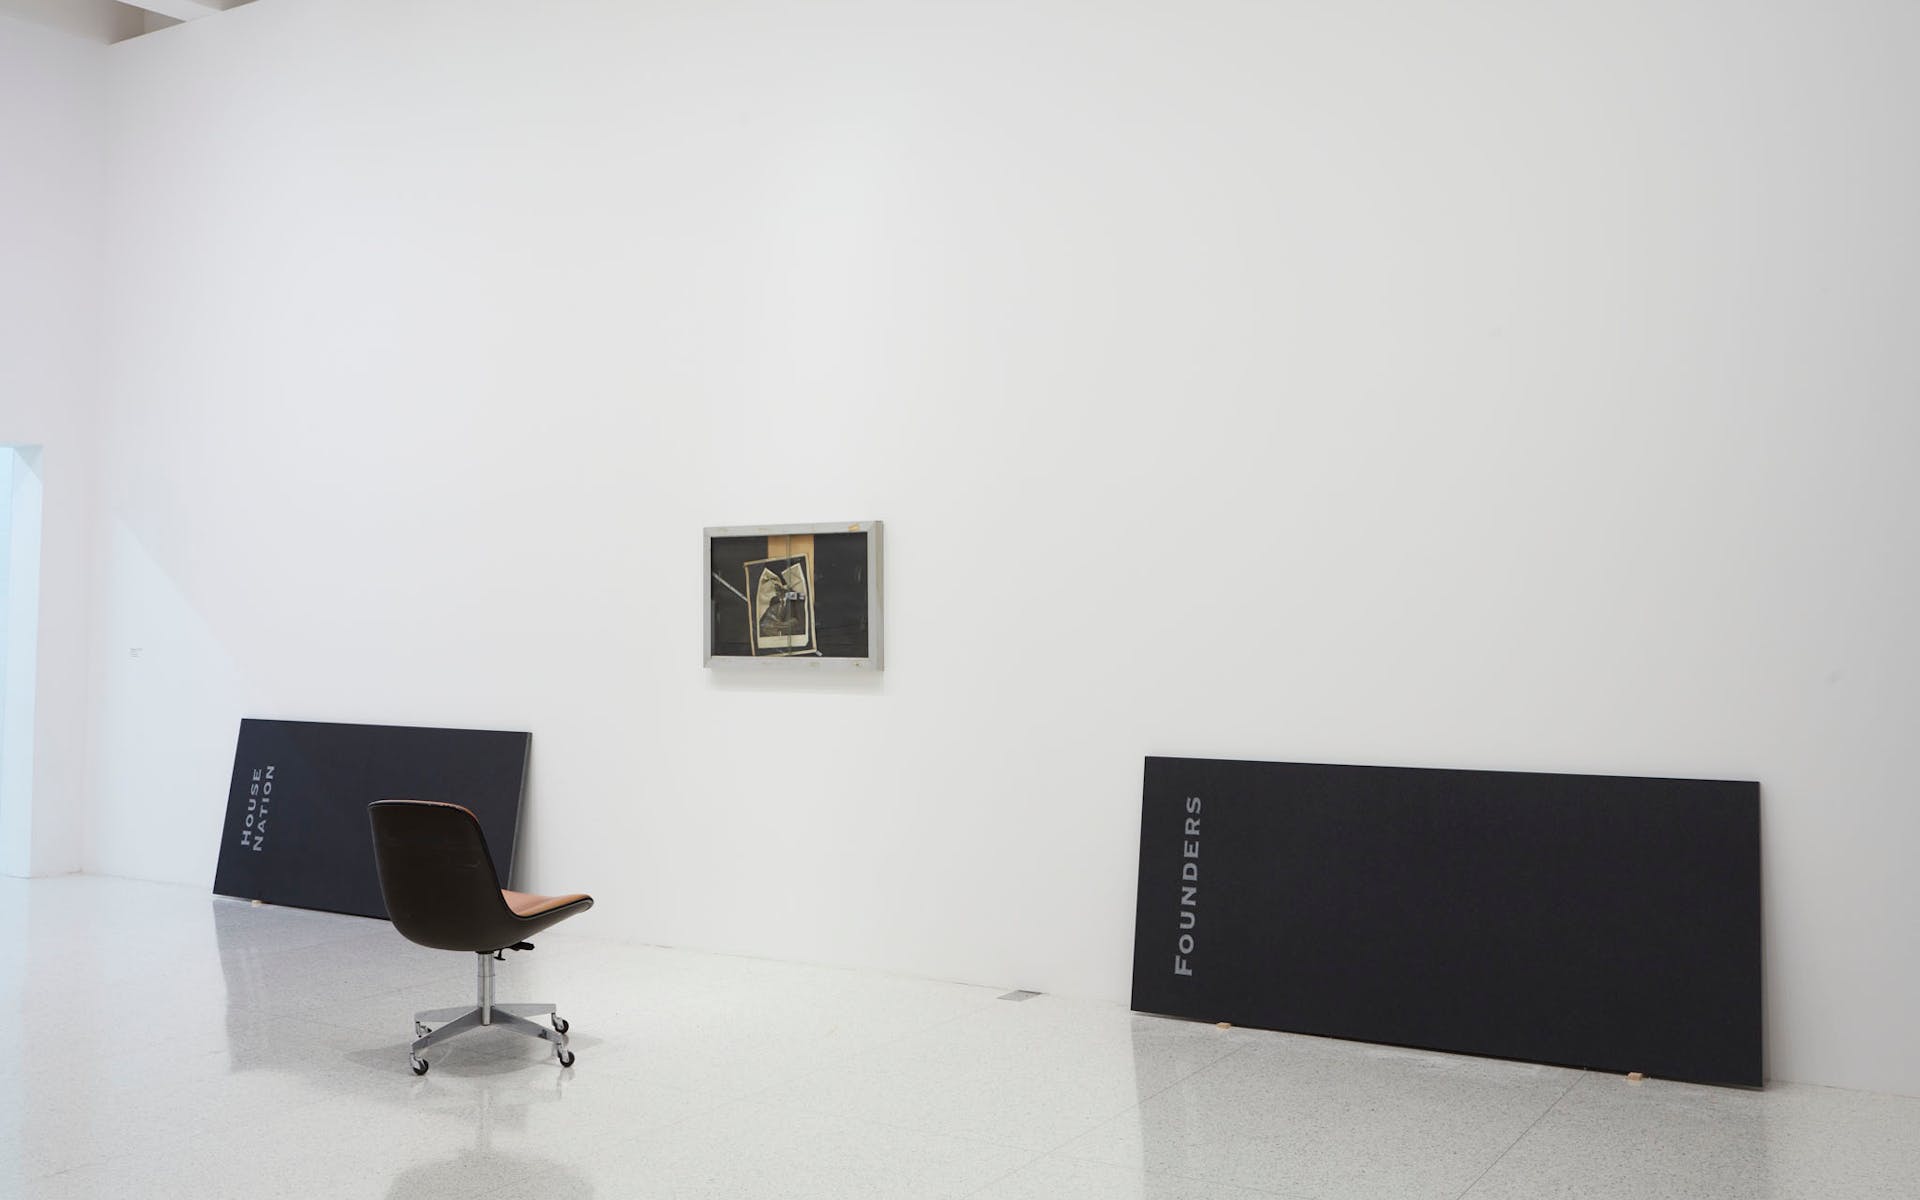 View of the exhibition Question the Wall Itself, 2016; (left to right) Theaster Gates, House Nation Plaque, 2016; Theaster Gates, A Maimed King, 2012; Theaster Gates, Founder’s Plaque, 2016 (Photo: Gene Pittman, ©Walker Art Center)